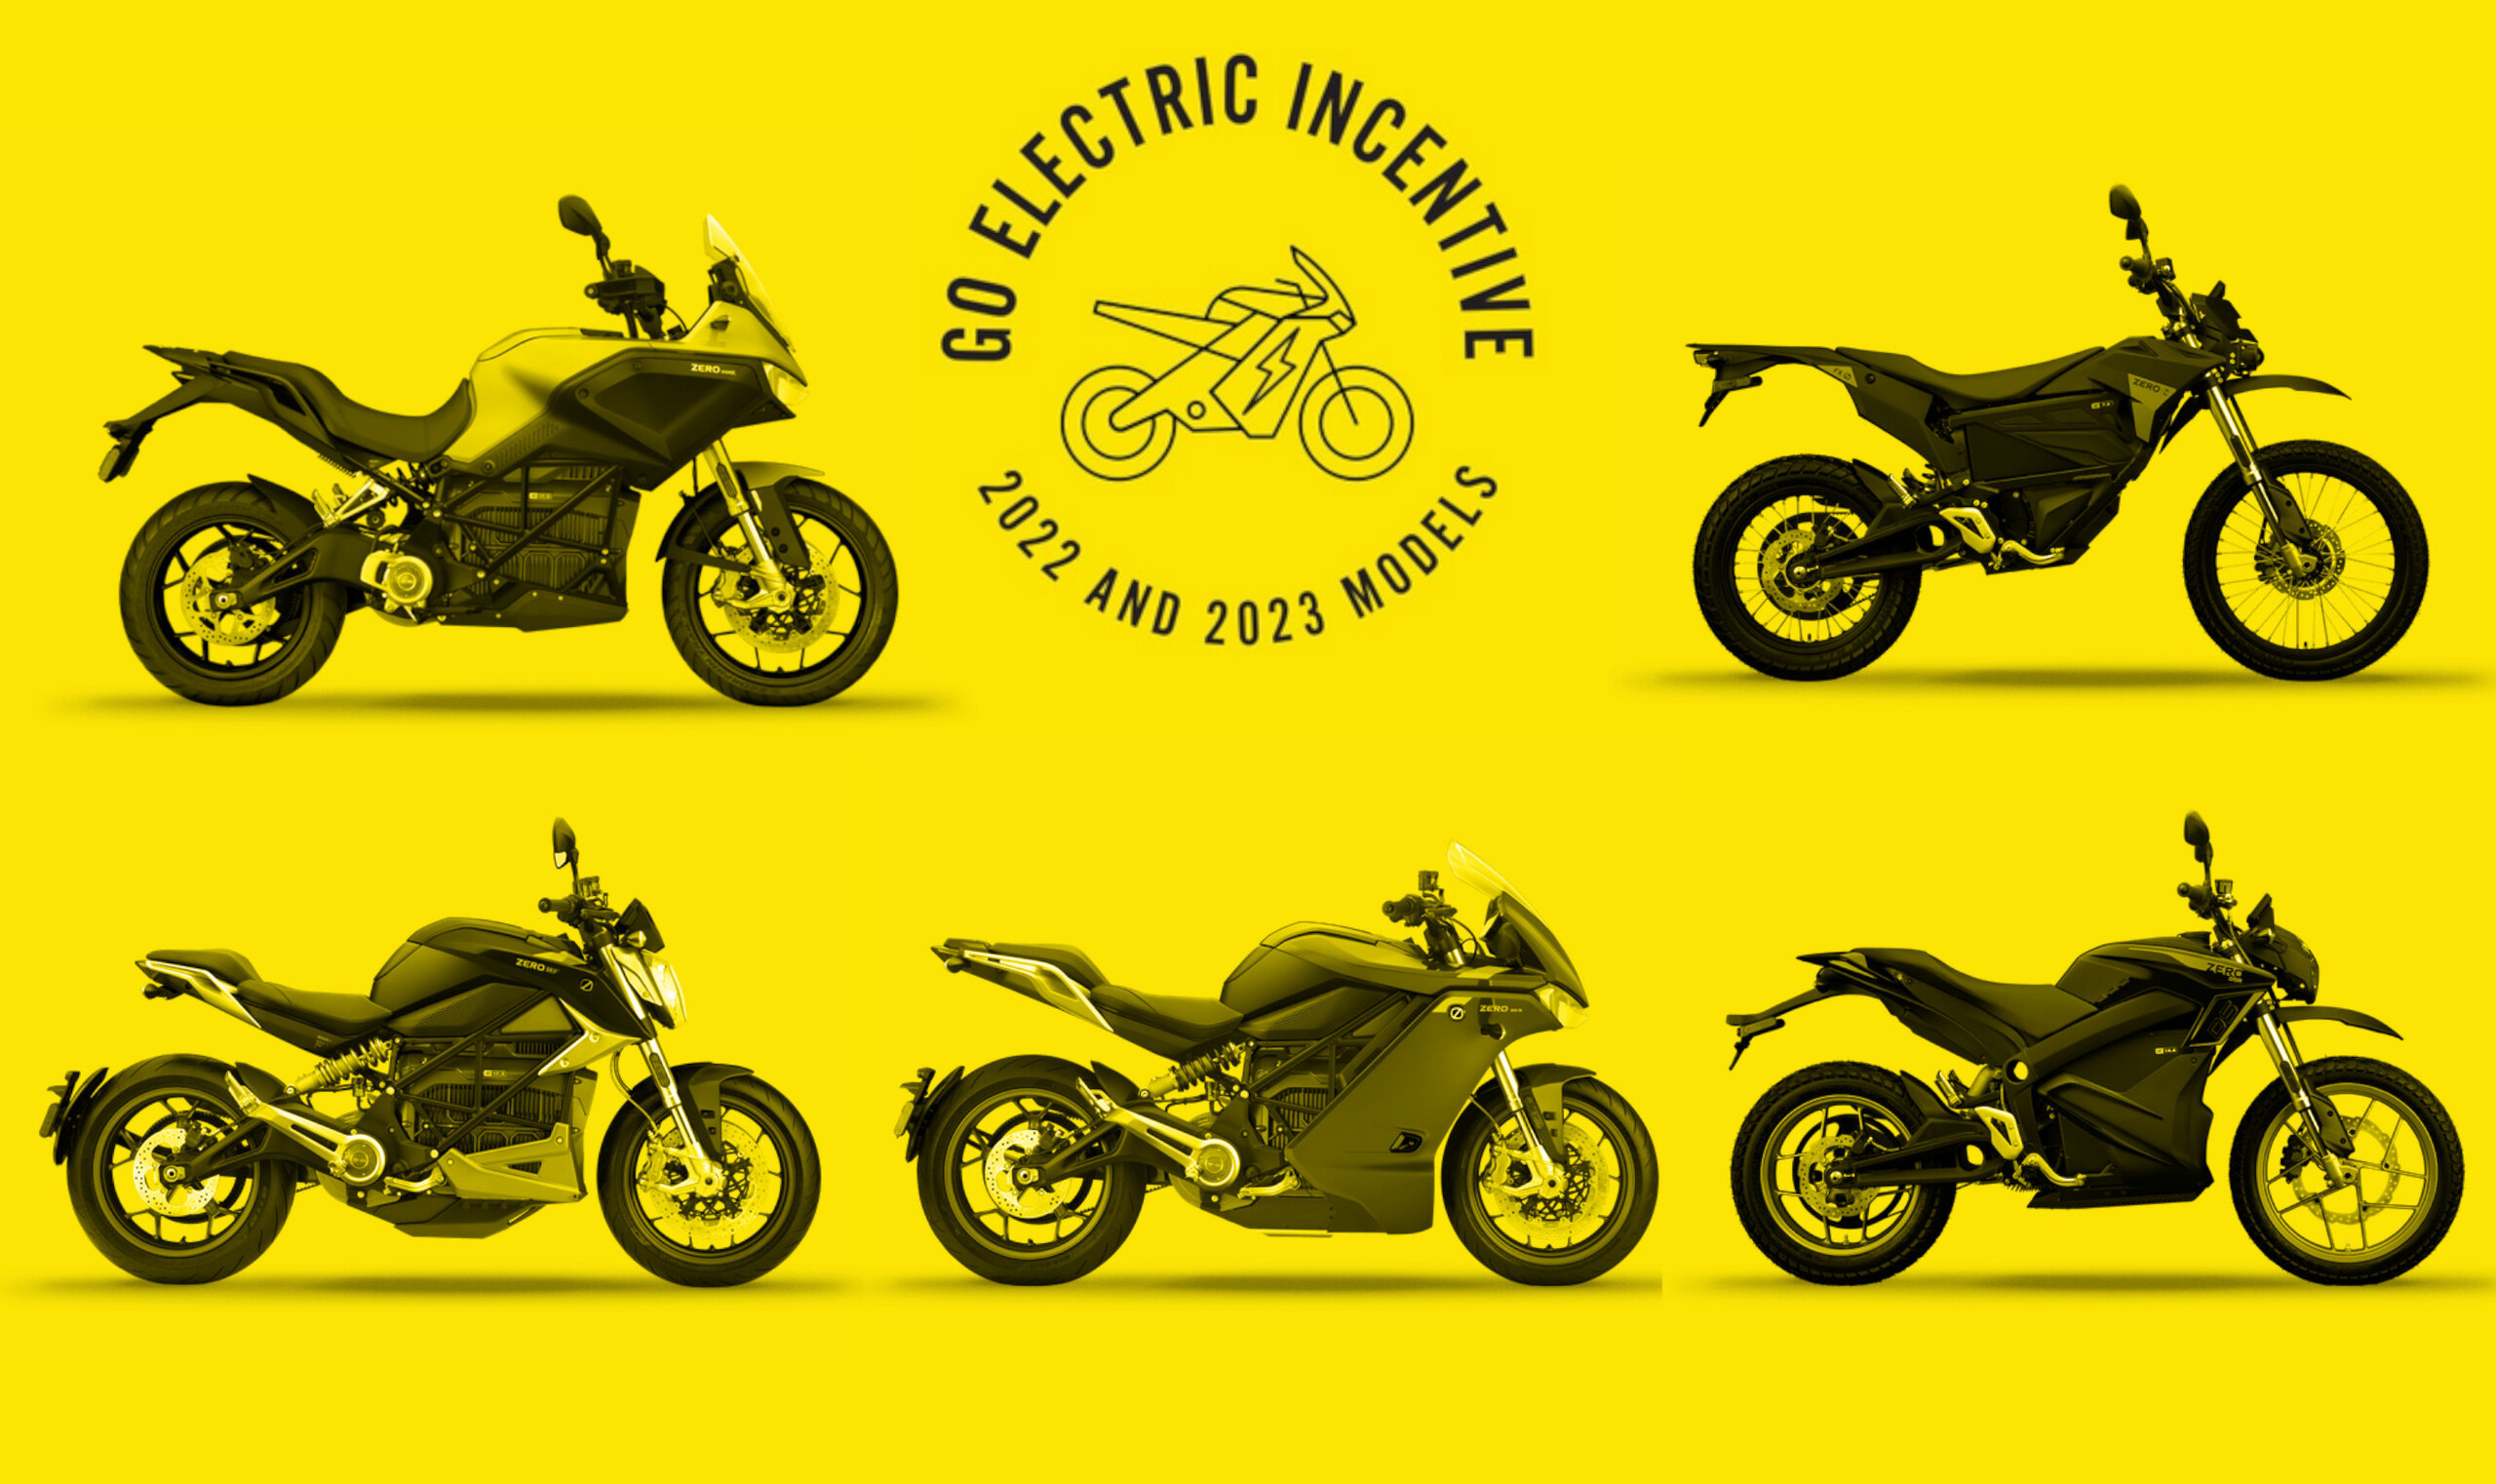 zero-motorcycles-offers-significant-cash-back-rebate-on-2022-2023